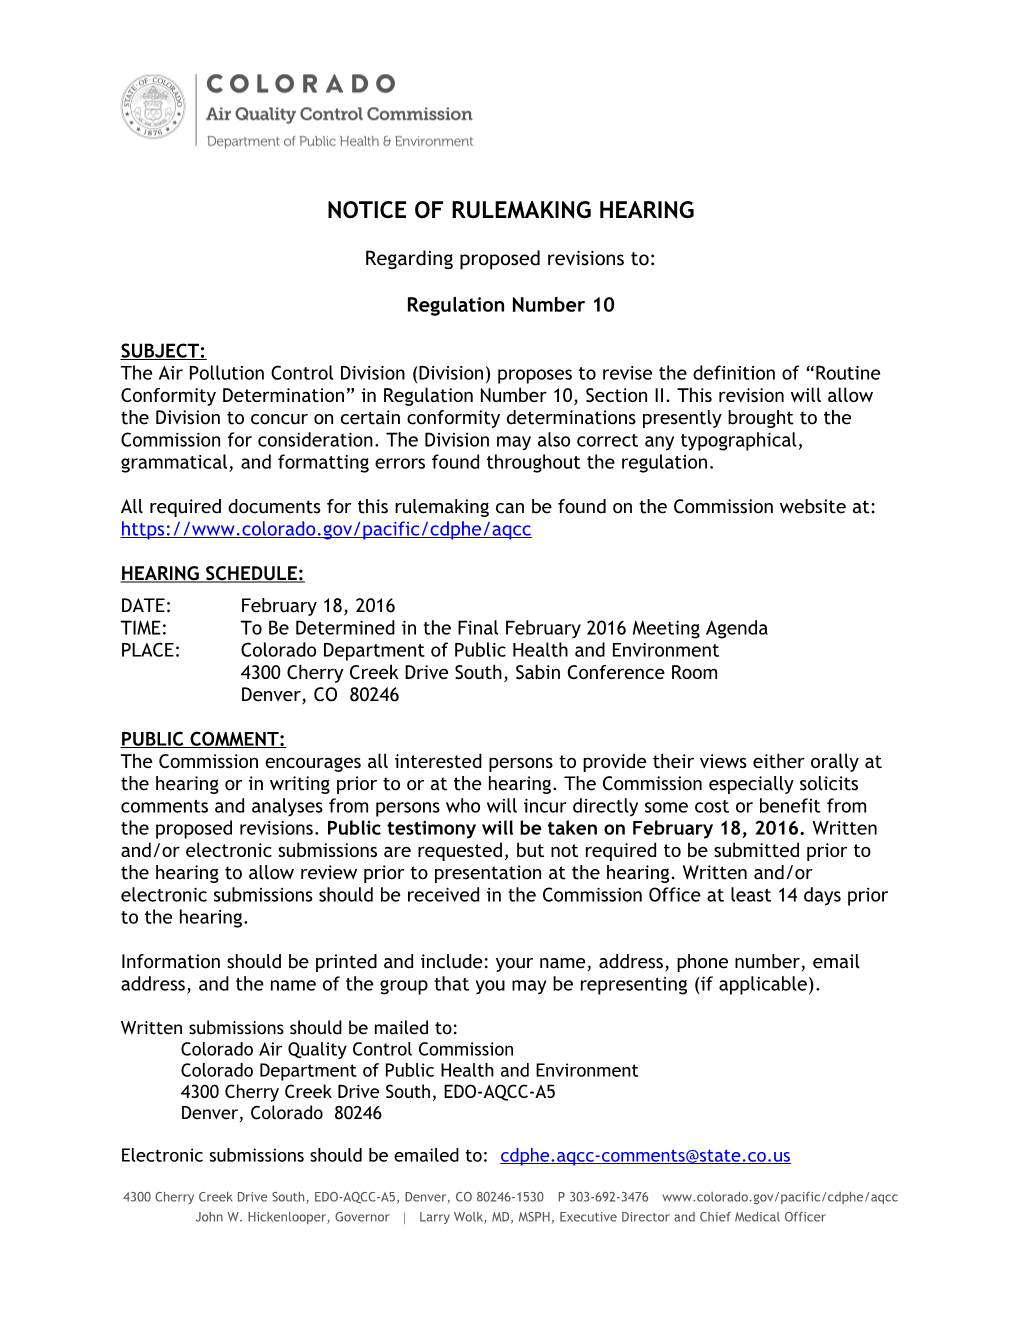 Notice of Public Rulemaking Hearing